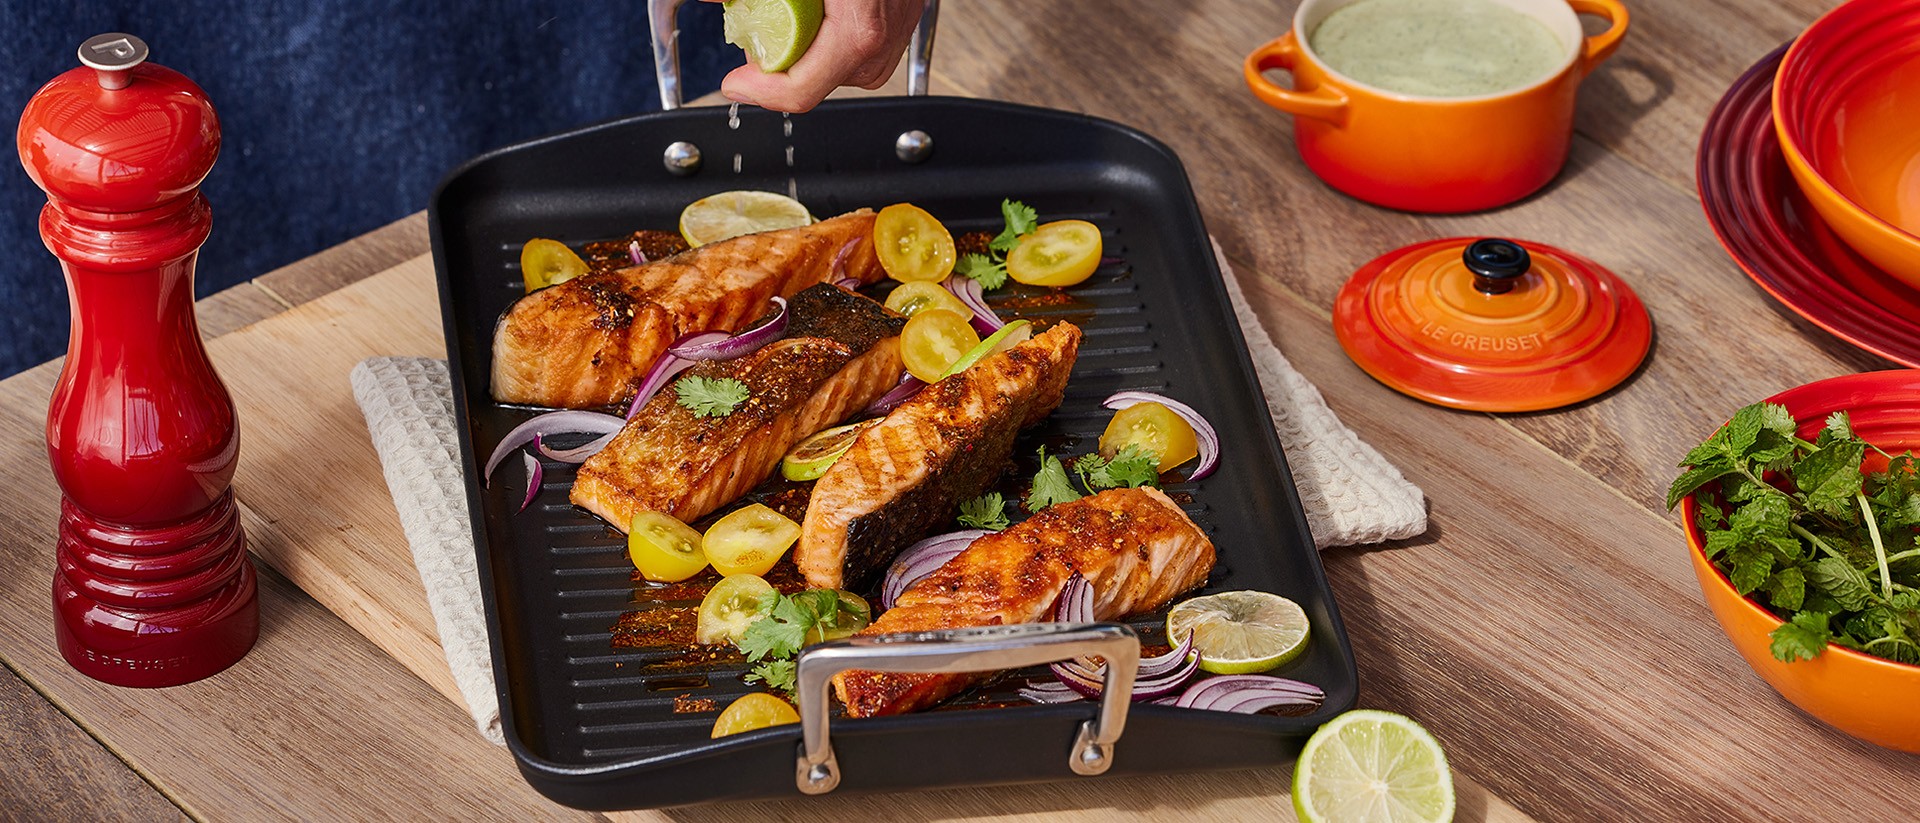 https://www.lecreuset.com.au/on/demandware.static/-/Sites-LCAU-Library/default/dw7ea508ce/images/2023/H1/Evergreen/How%20to%20clean%20your%20grill/2023_H1_HowtoCleanaGrill_1920x823_7.jpg